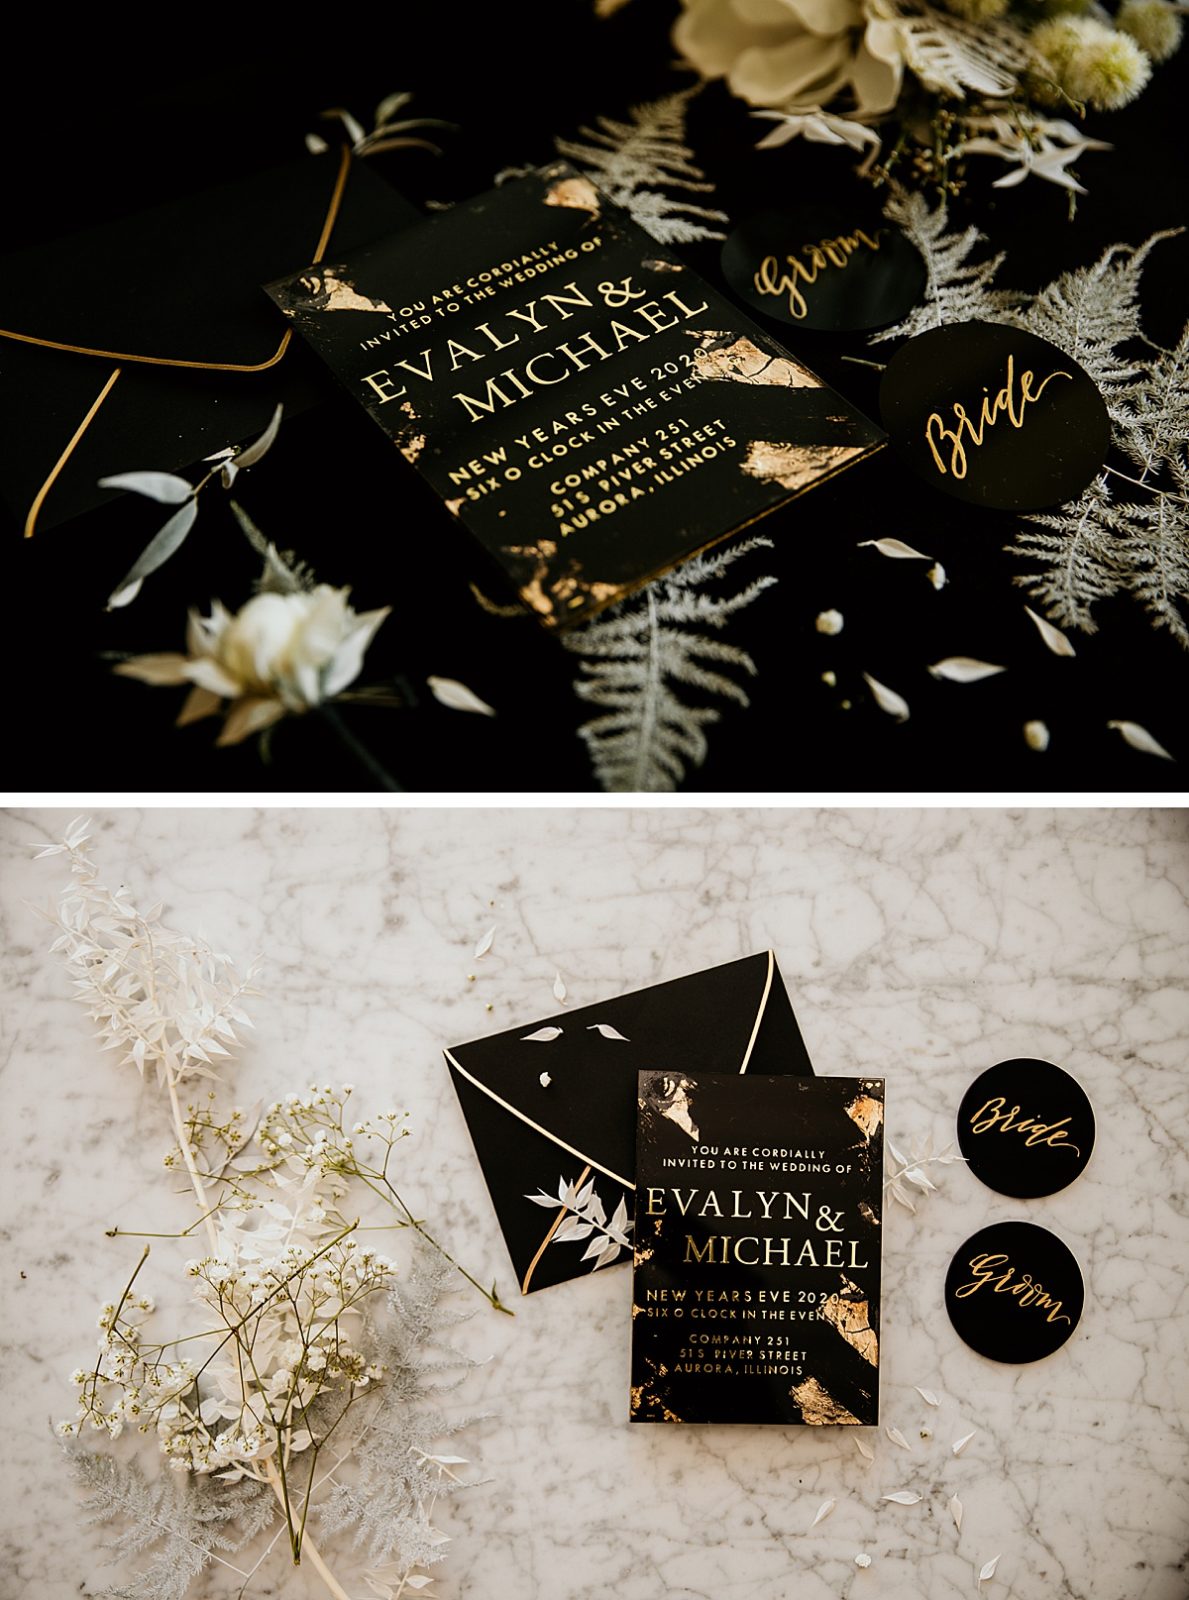 New years ever wedding flat lay with a black and gold invitation and envelope as well as the bride and groom name cards and some florals